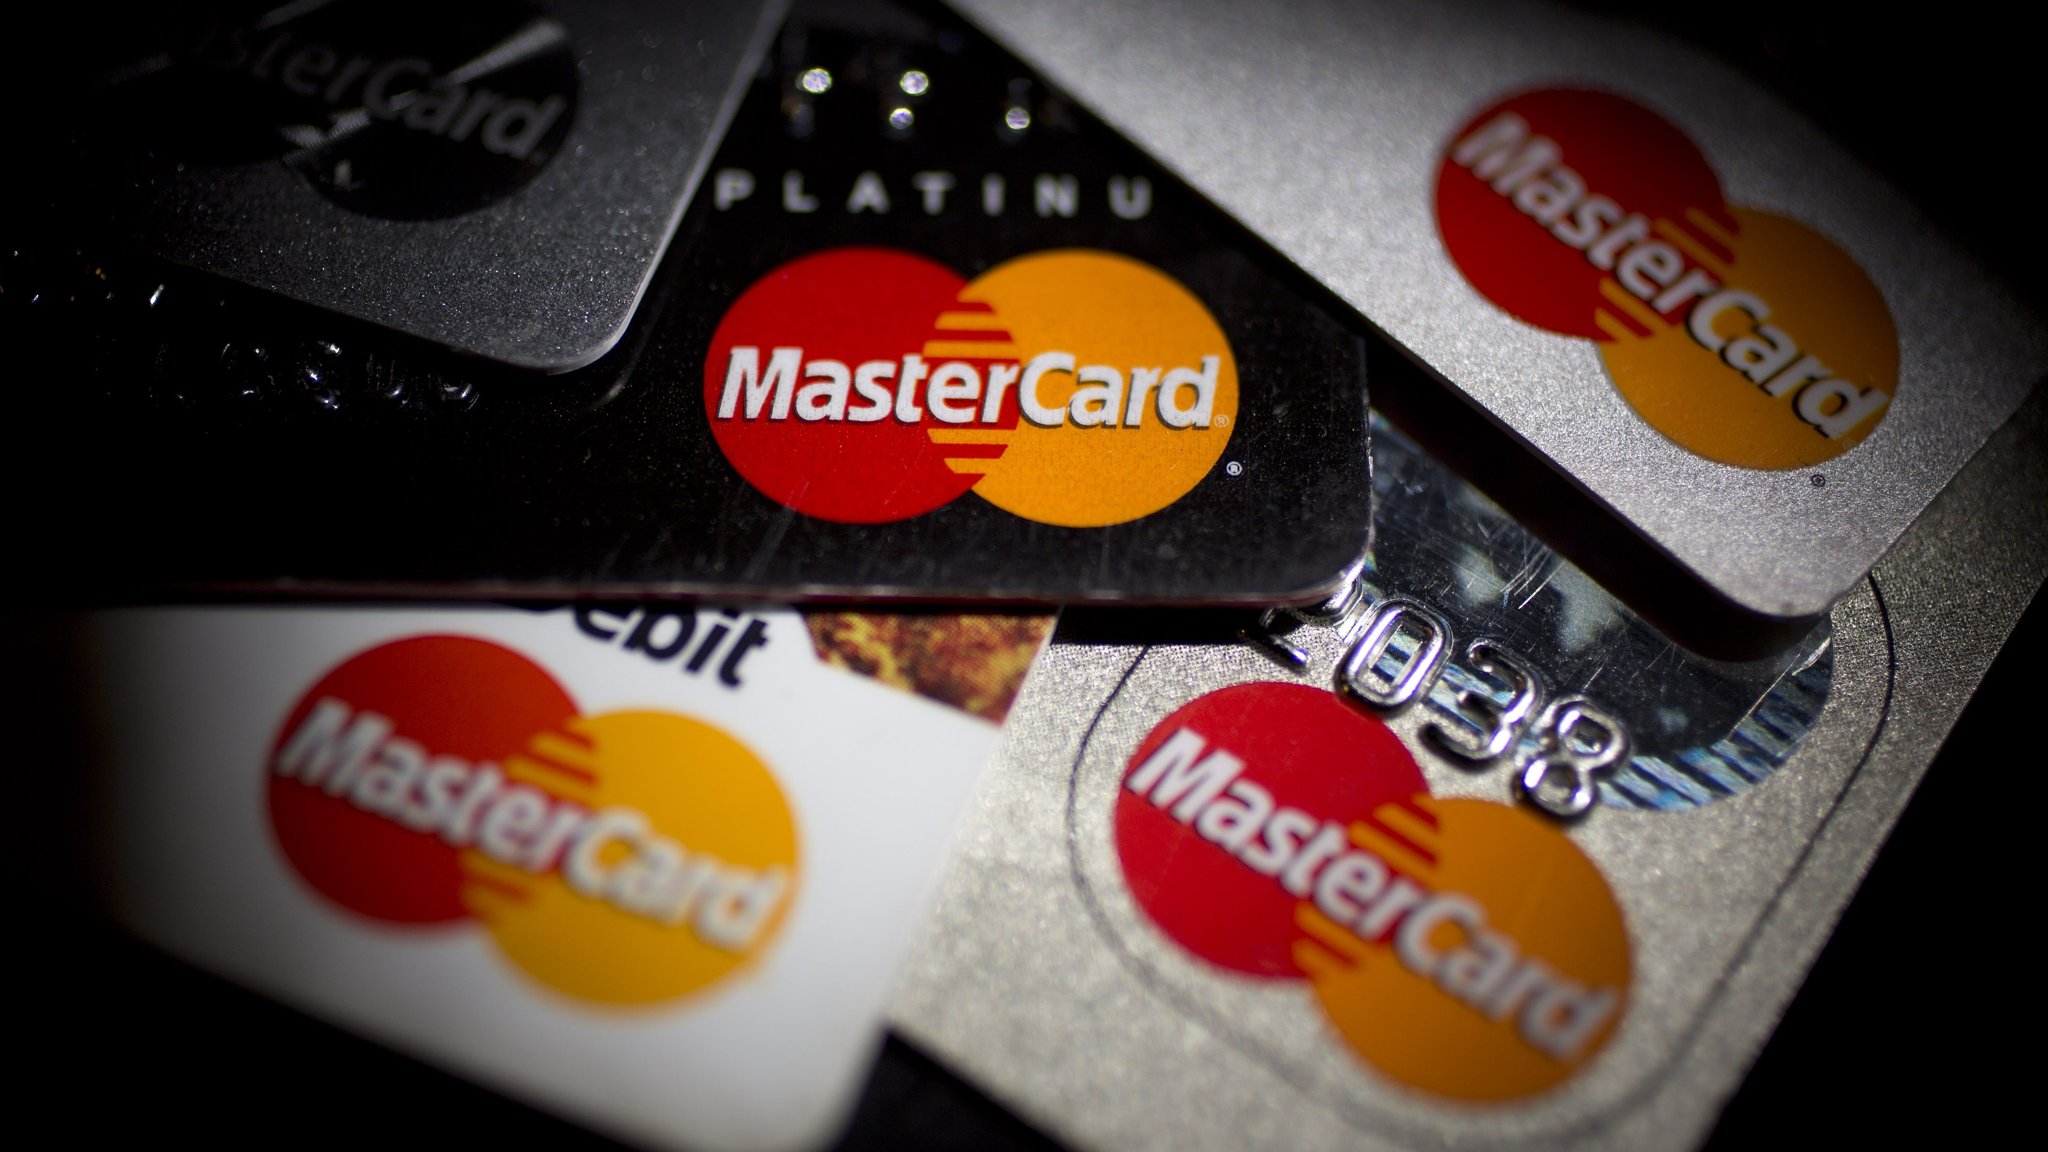 My Take: Mastercard Now Requires Merchants To Get Approval For Charges After Free Trial